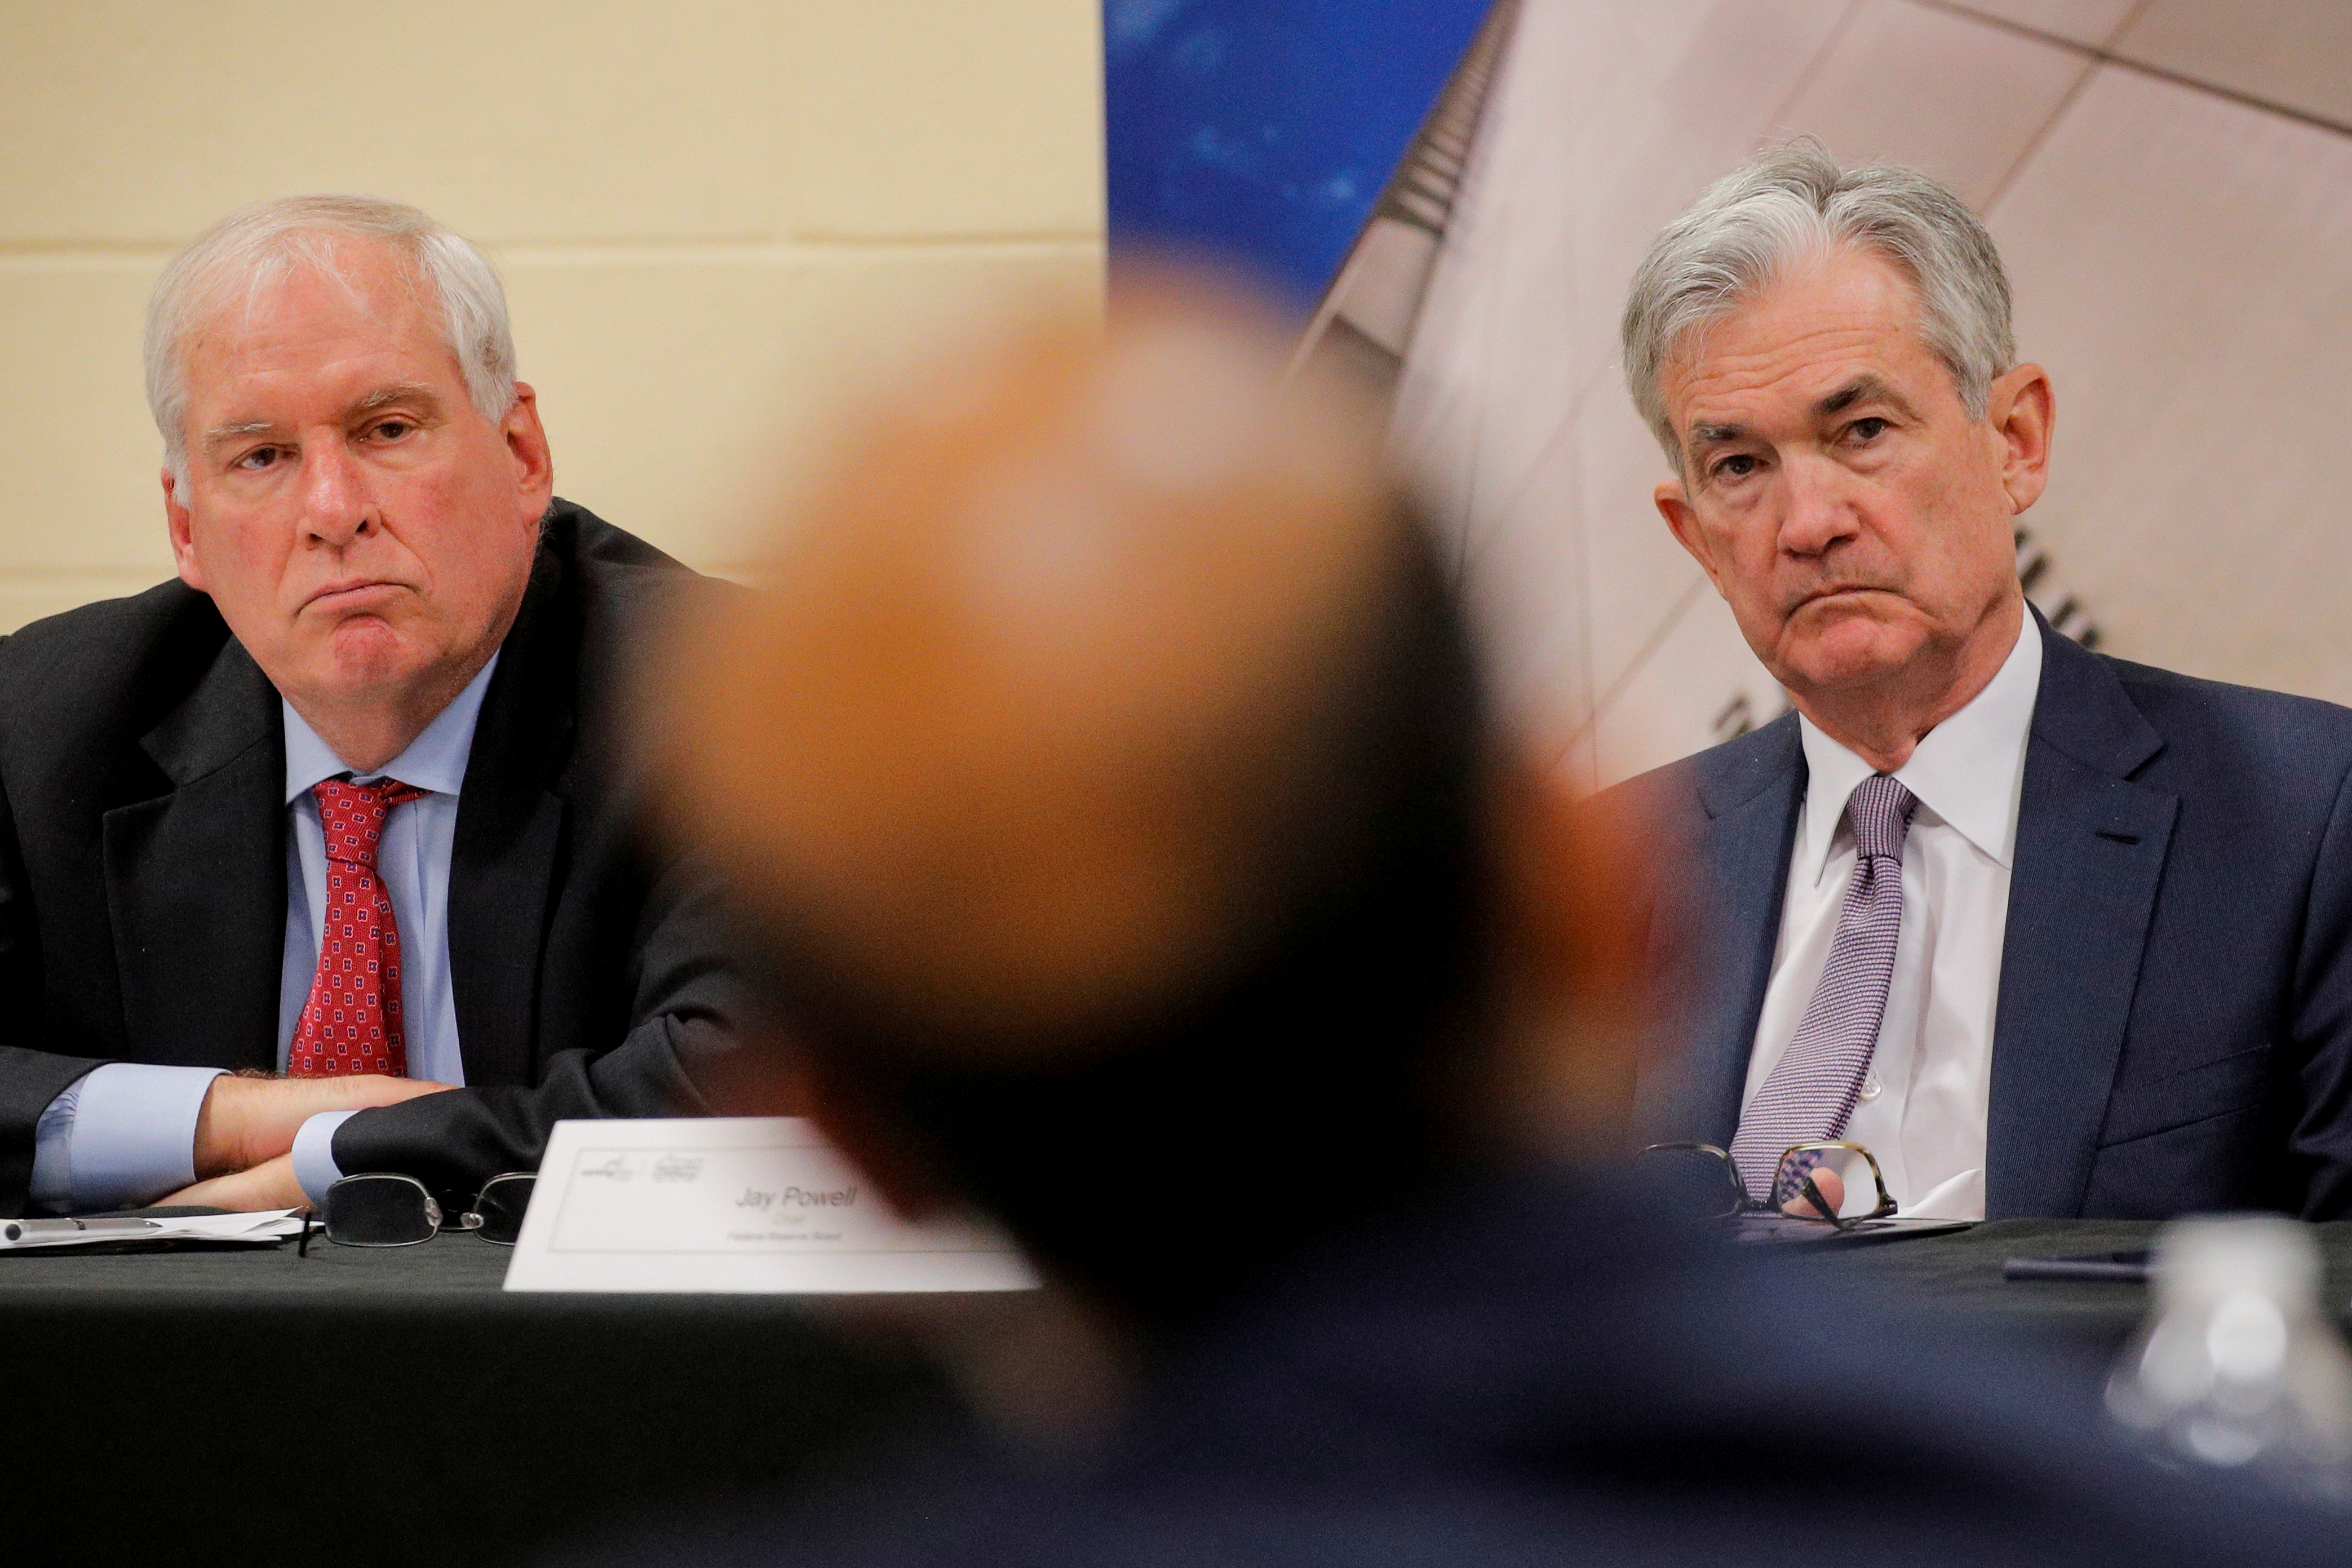 U.S. Federal Reserve Chair Jerome Powell and then-Boston Fed President Eric Rosengren attend a presentation in East Hartford, Connecticut, U.S., November 25, 2019. REUTERS/Brendan McDermid